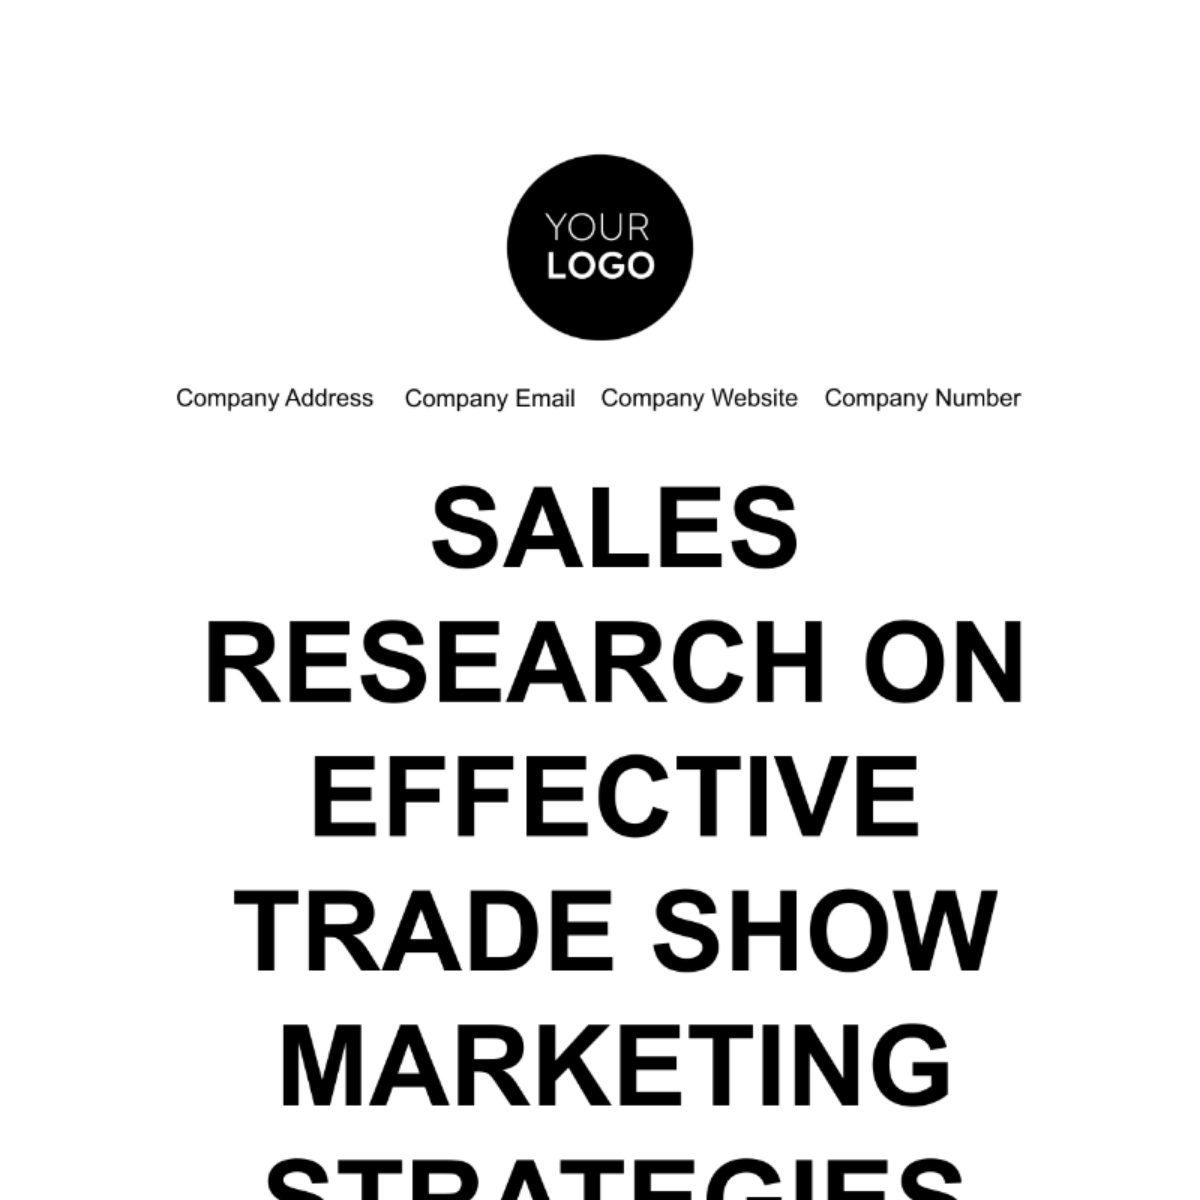 Sales Research on Effective Trade Show Marketing Strategies Template